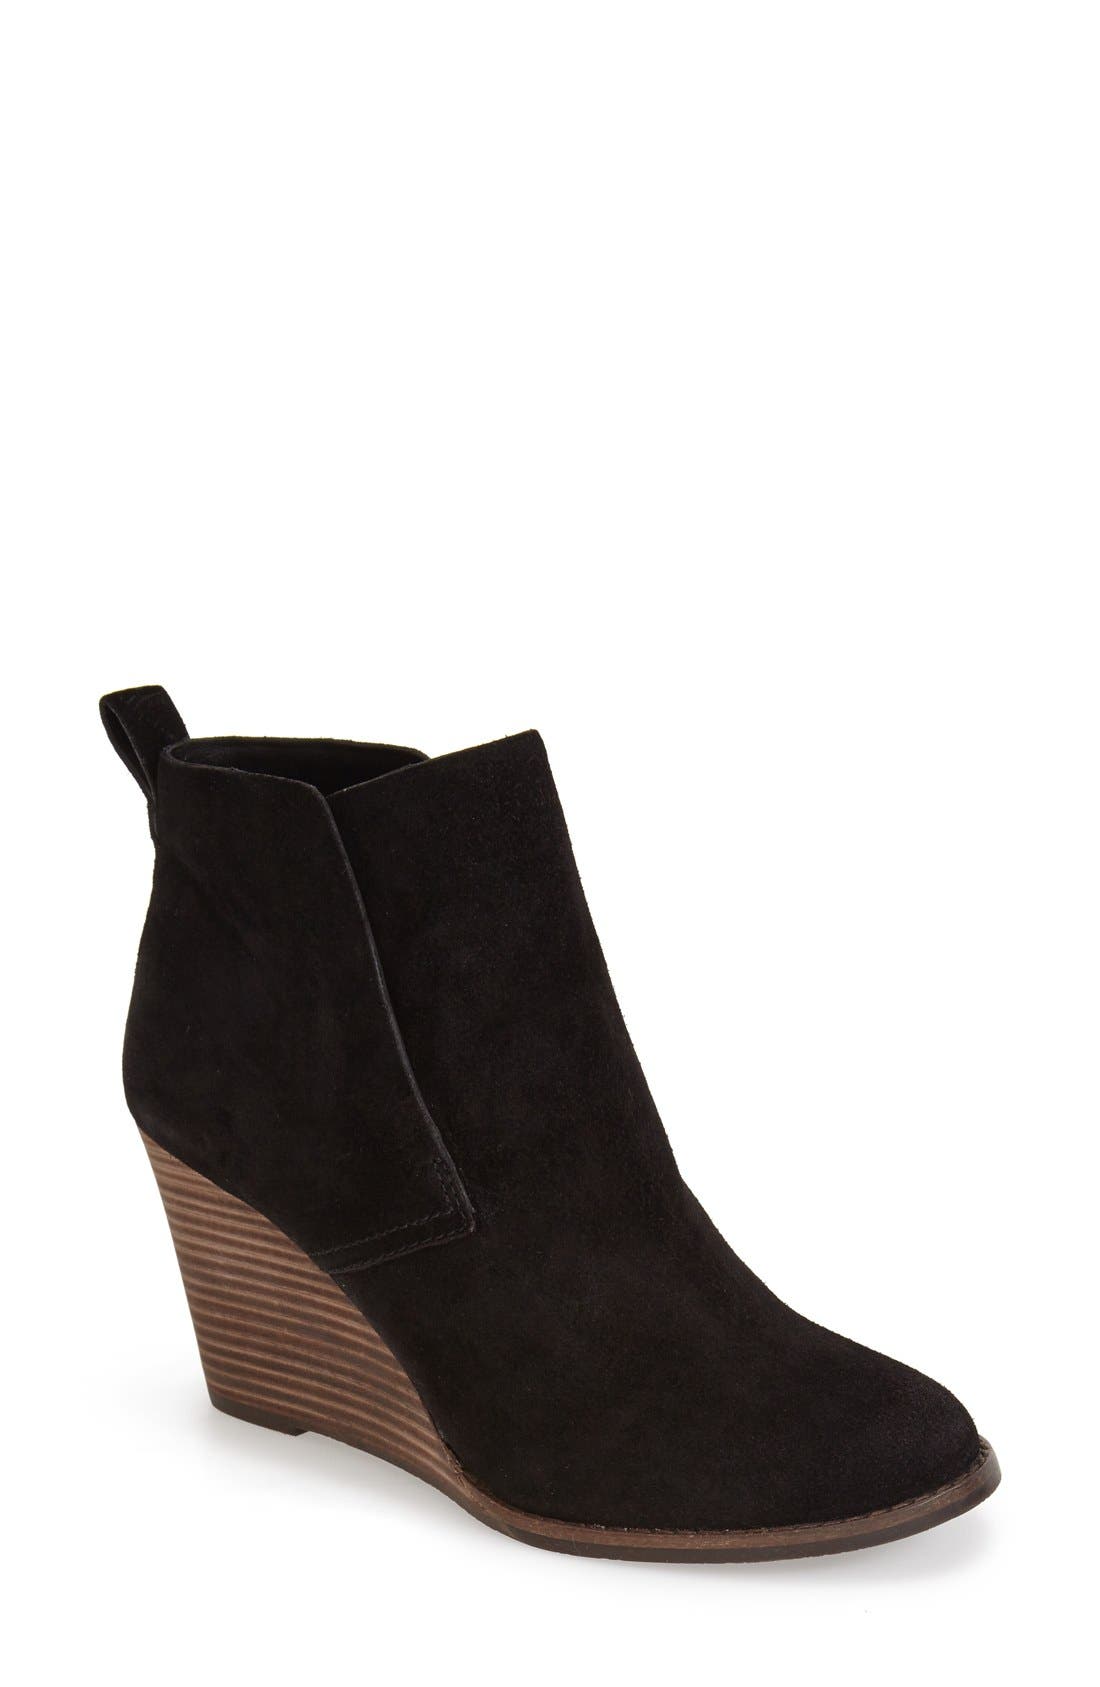 lucky brand suede wedge booties